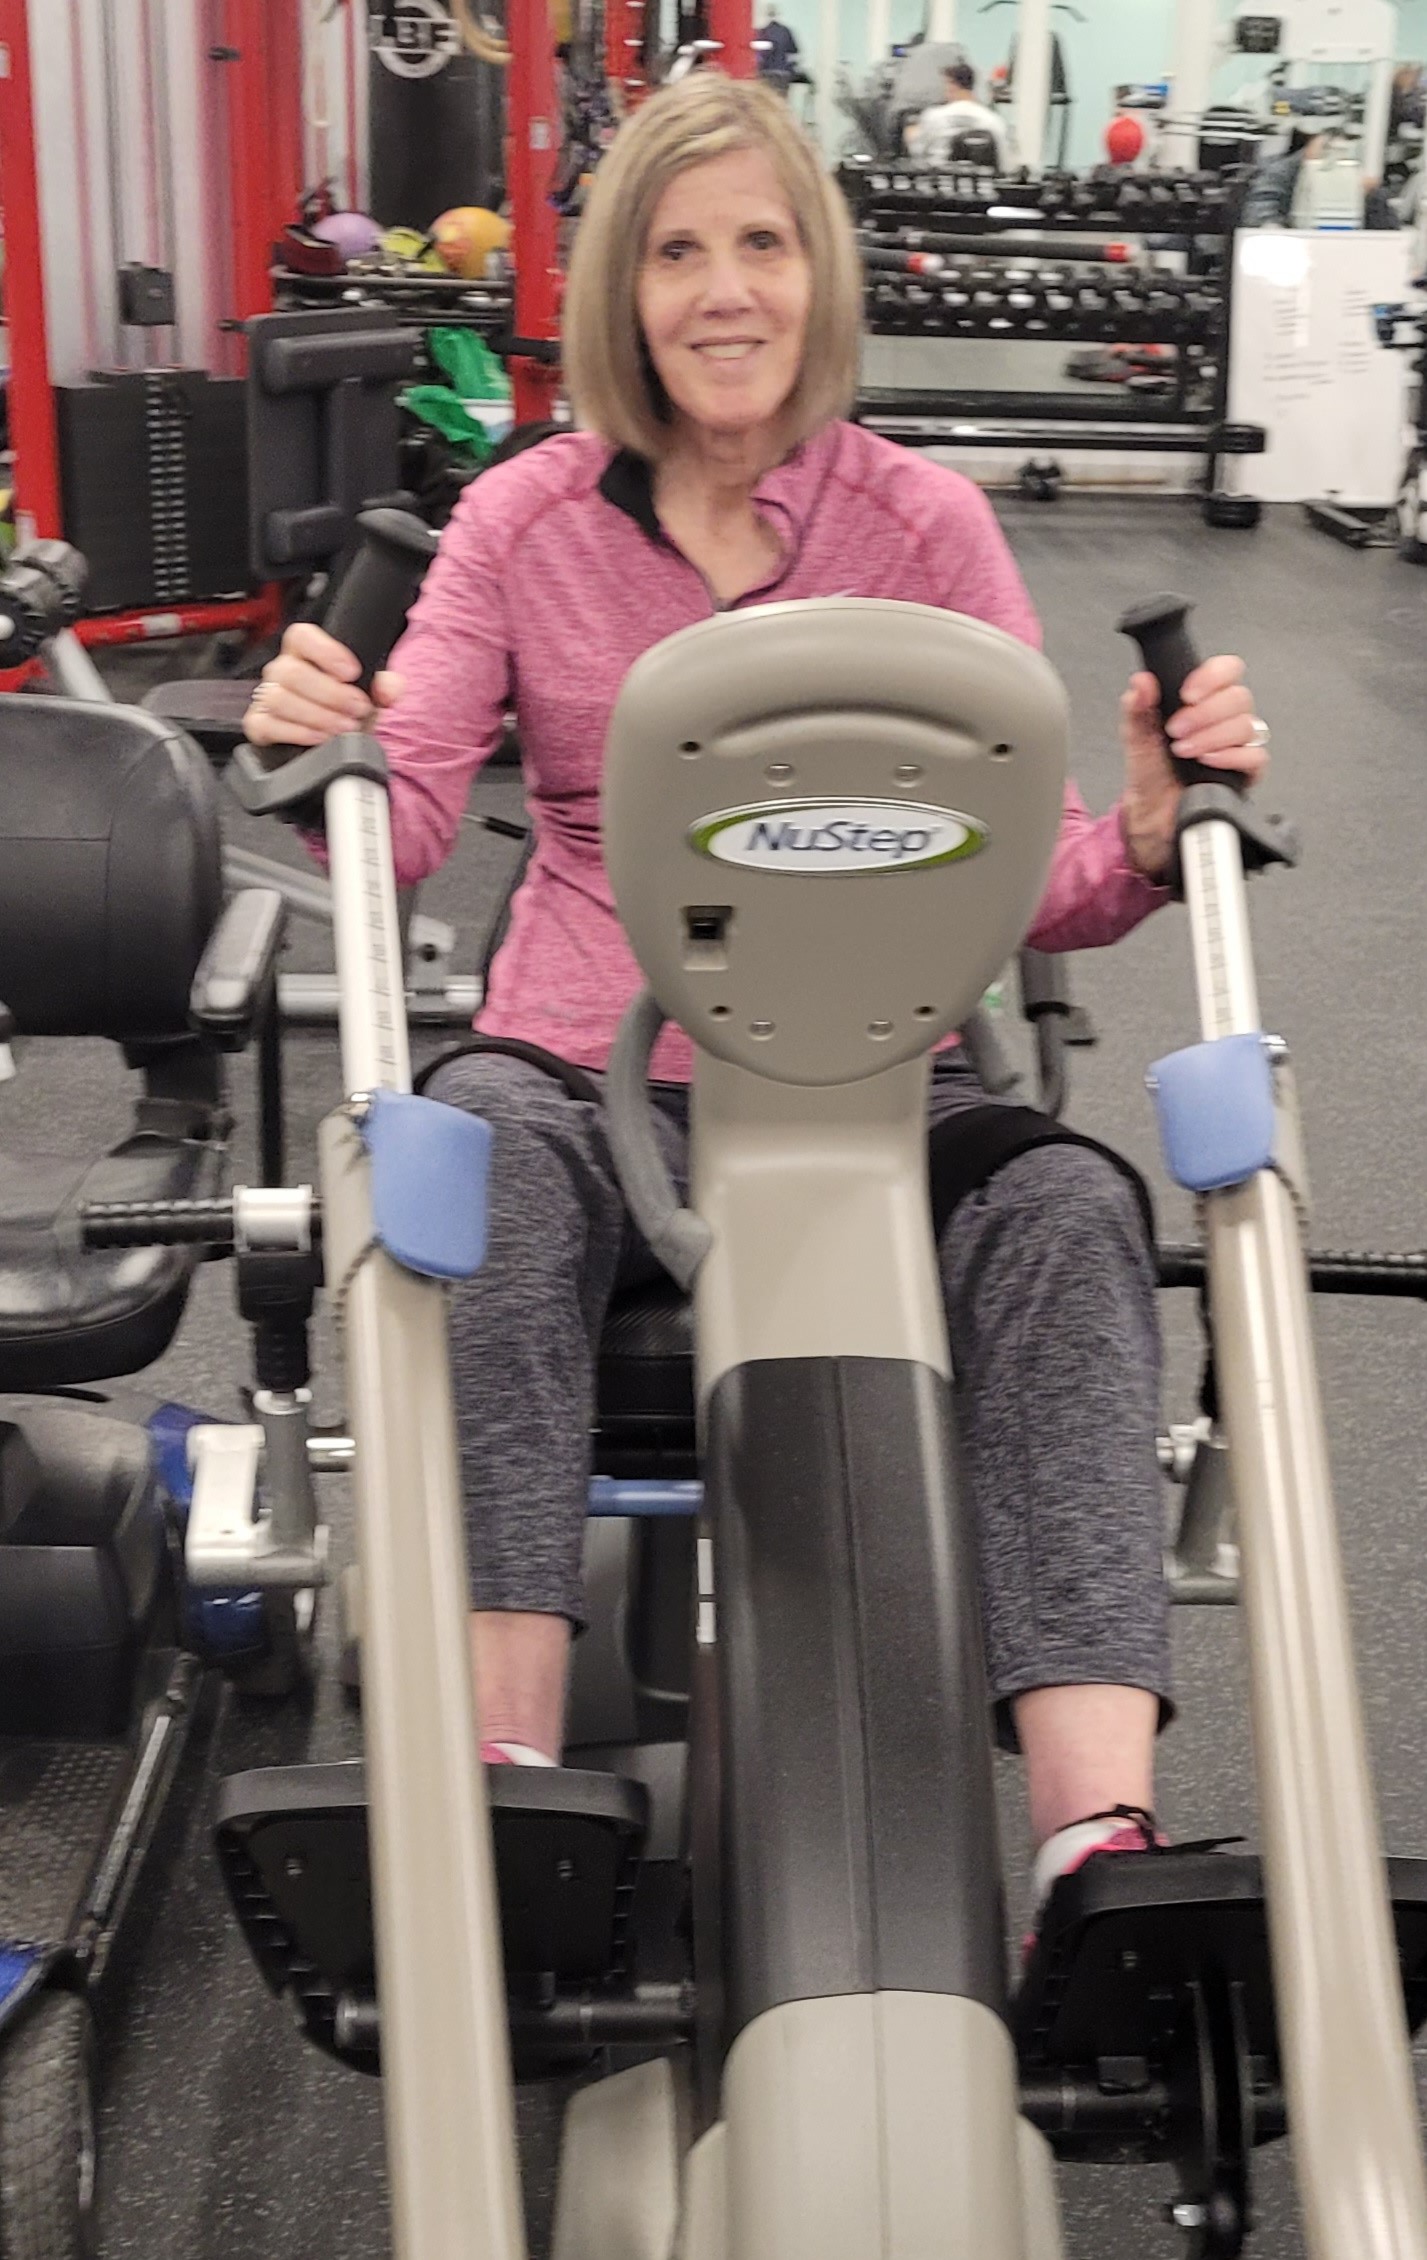 Sharon, wearing a pink top and grey pants, smiles while using a stationary bike.